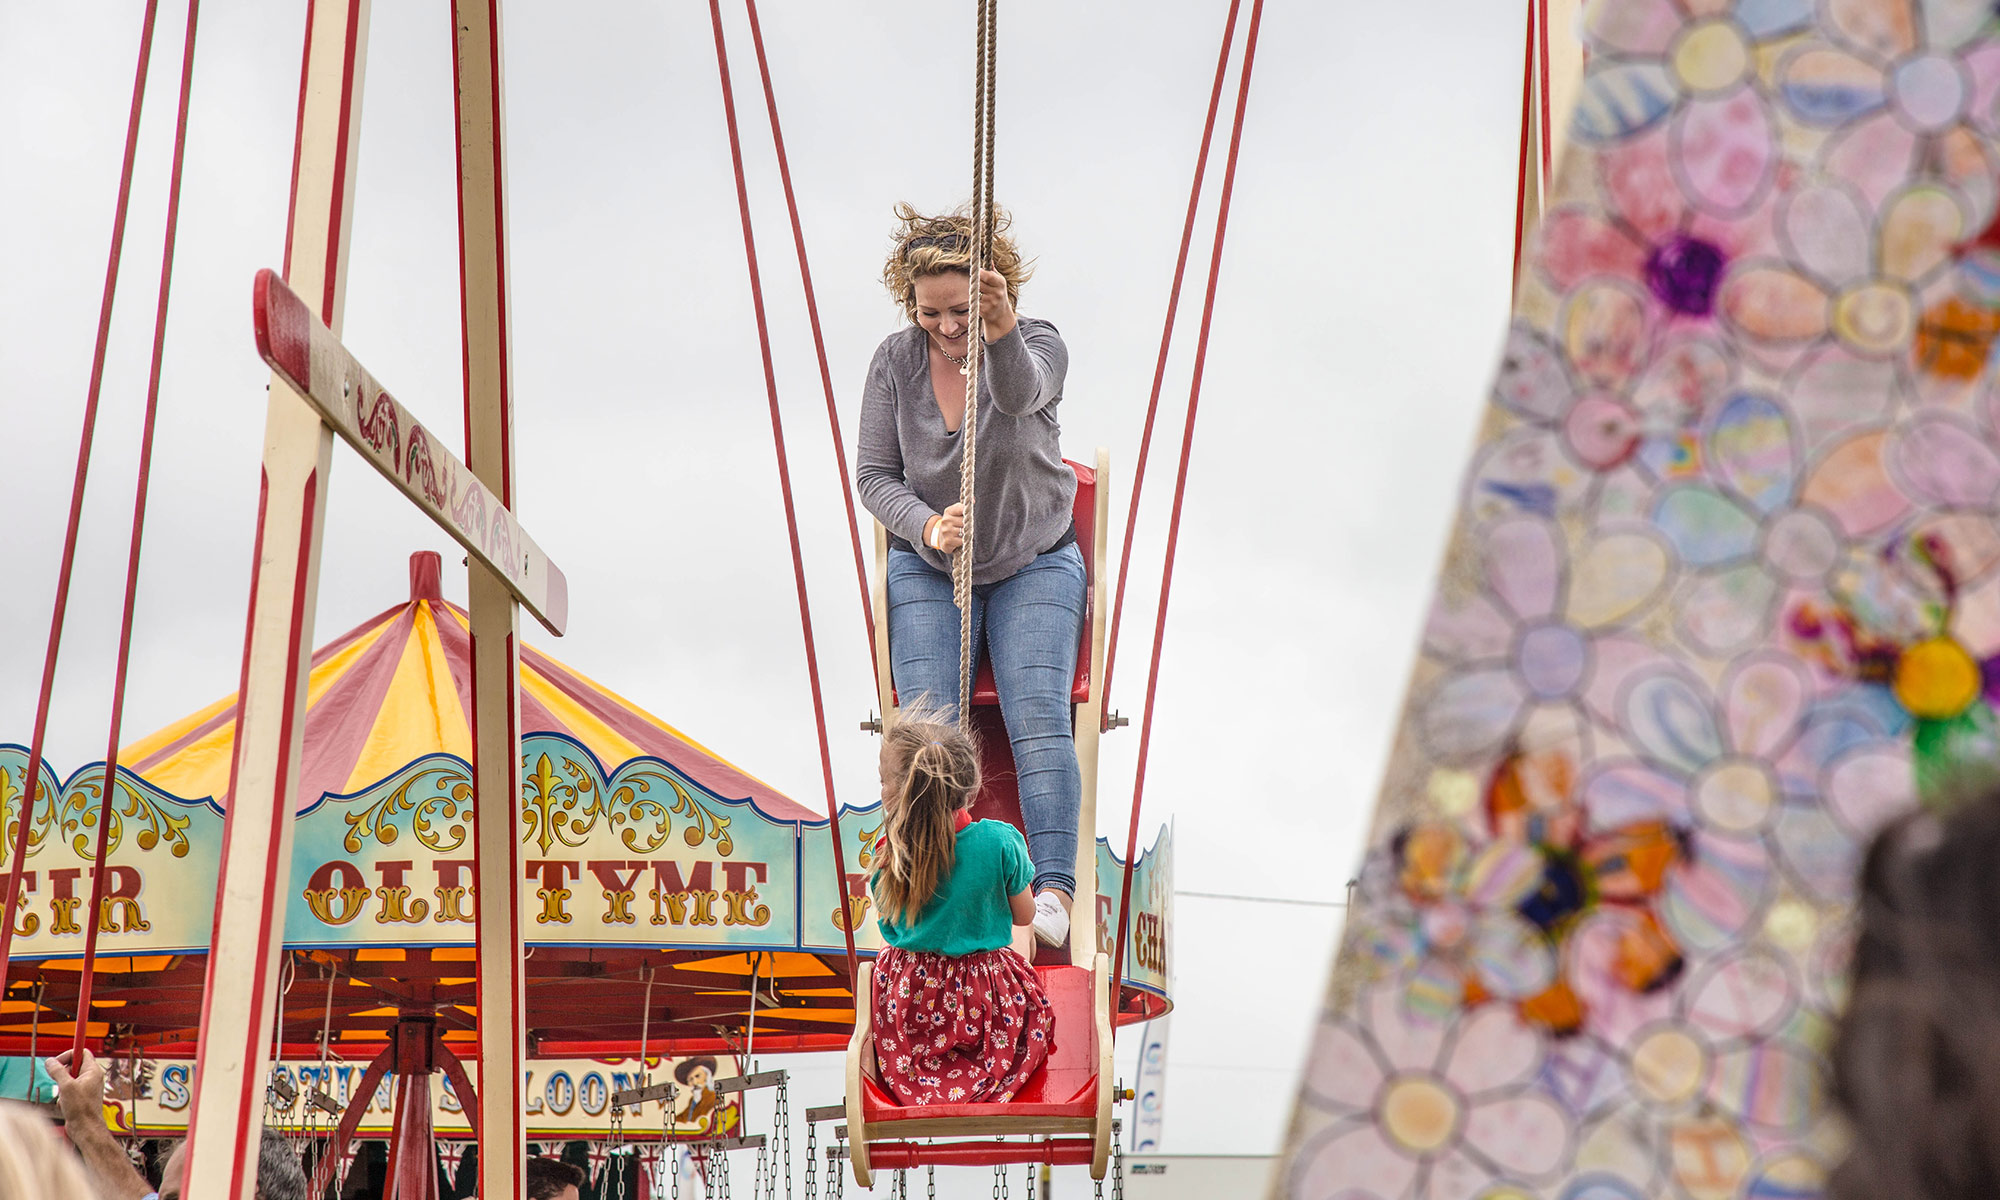 mother and child on a vintage fairground ride